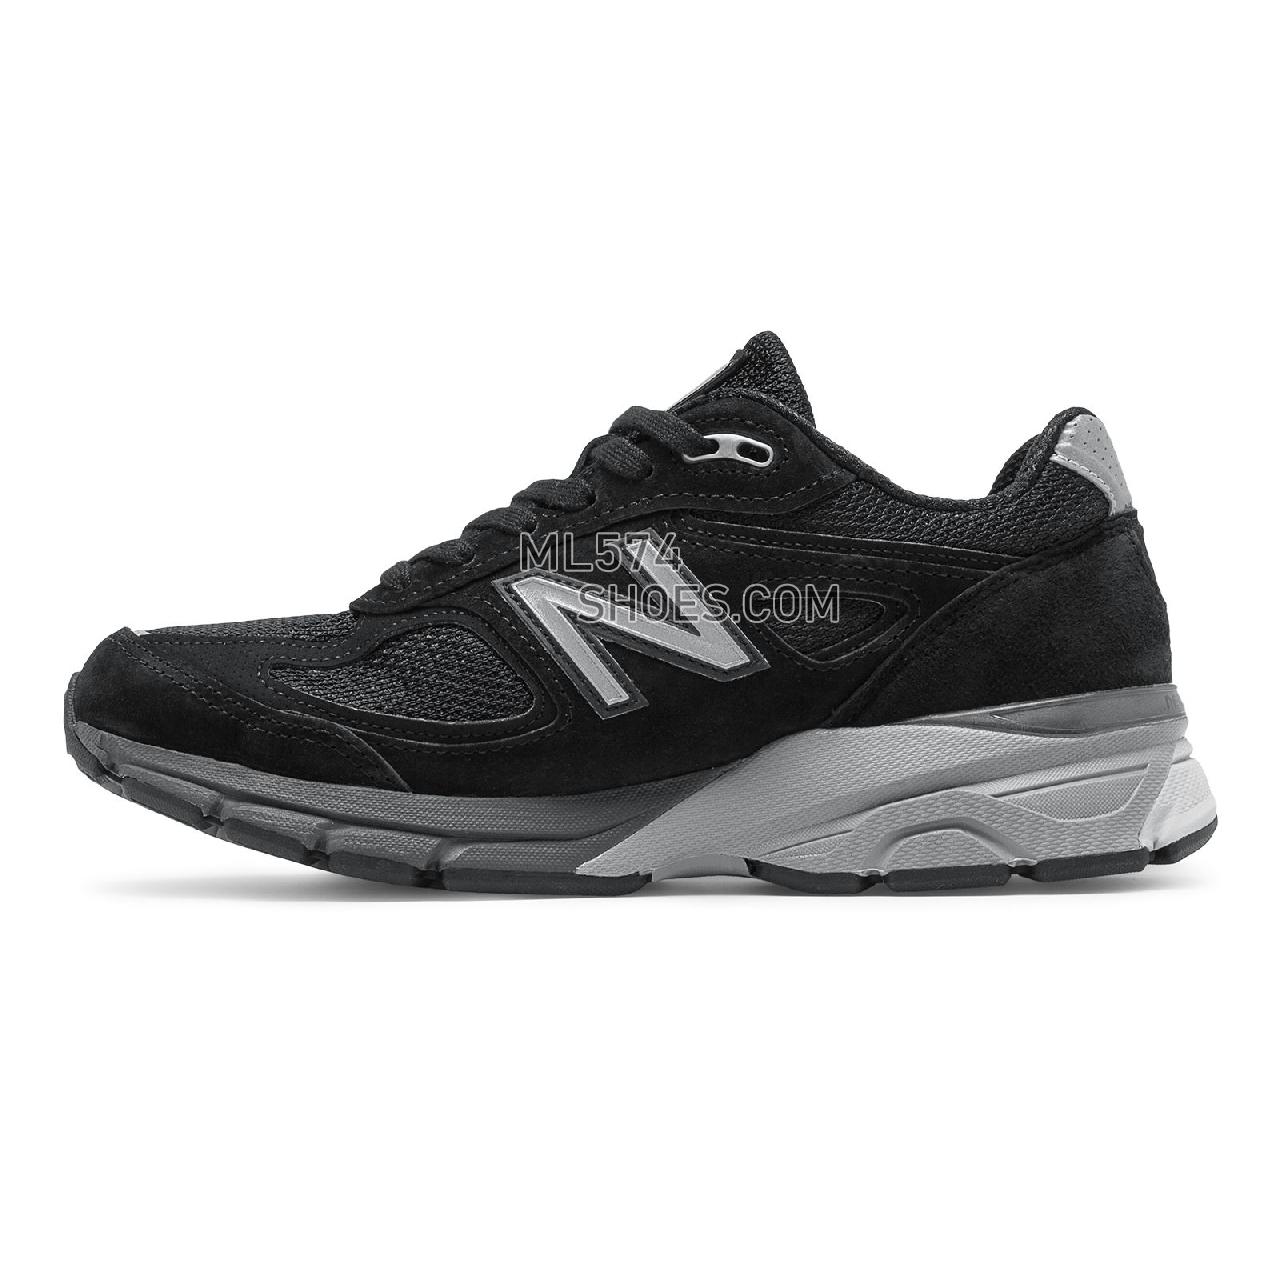 New Balance Womens 990v4 Made in US - Women's 990 - Running Black with Silver - W990BK4